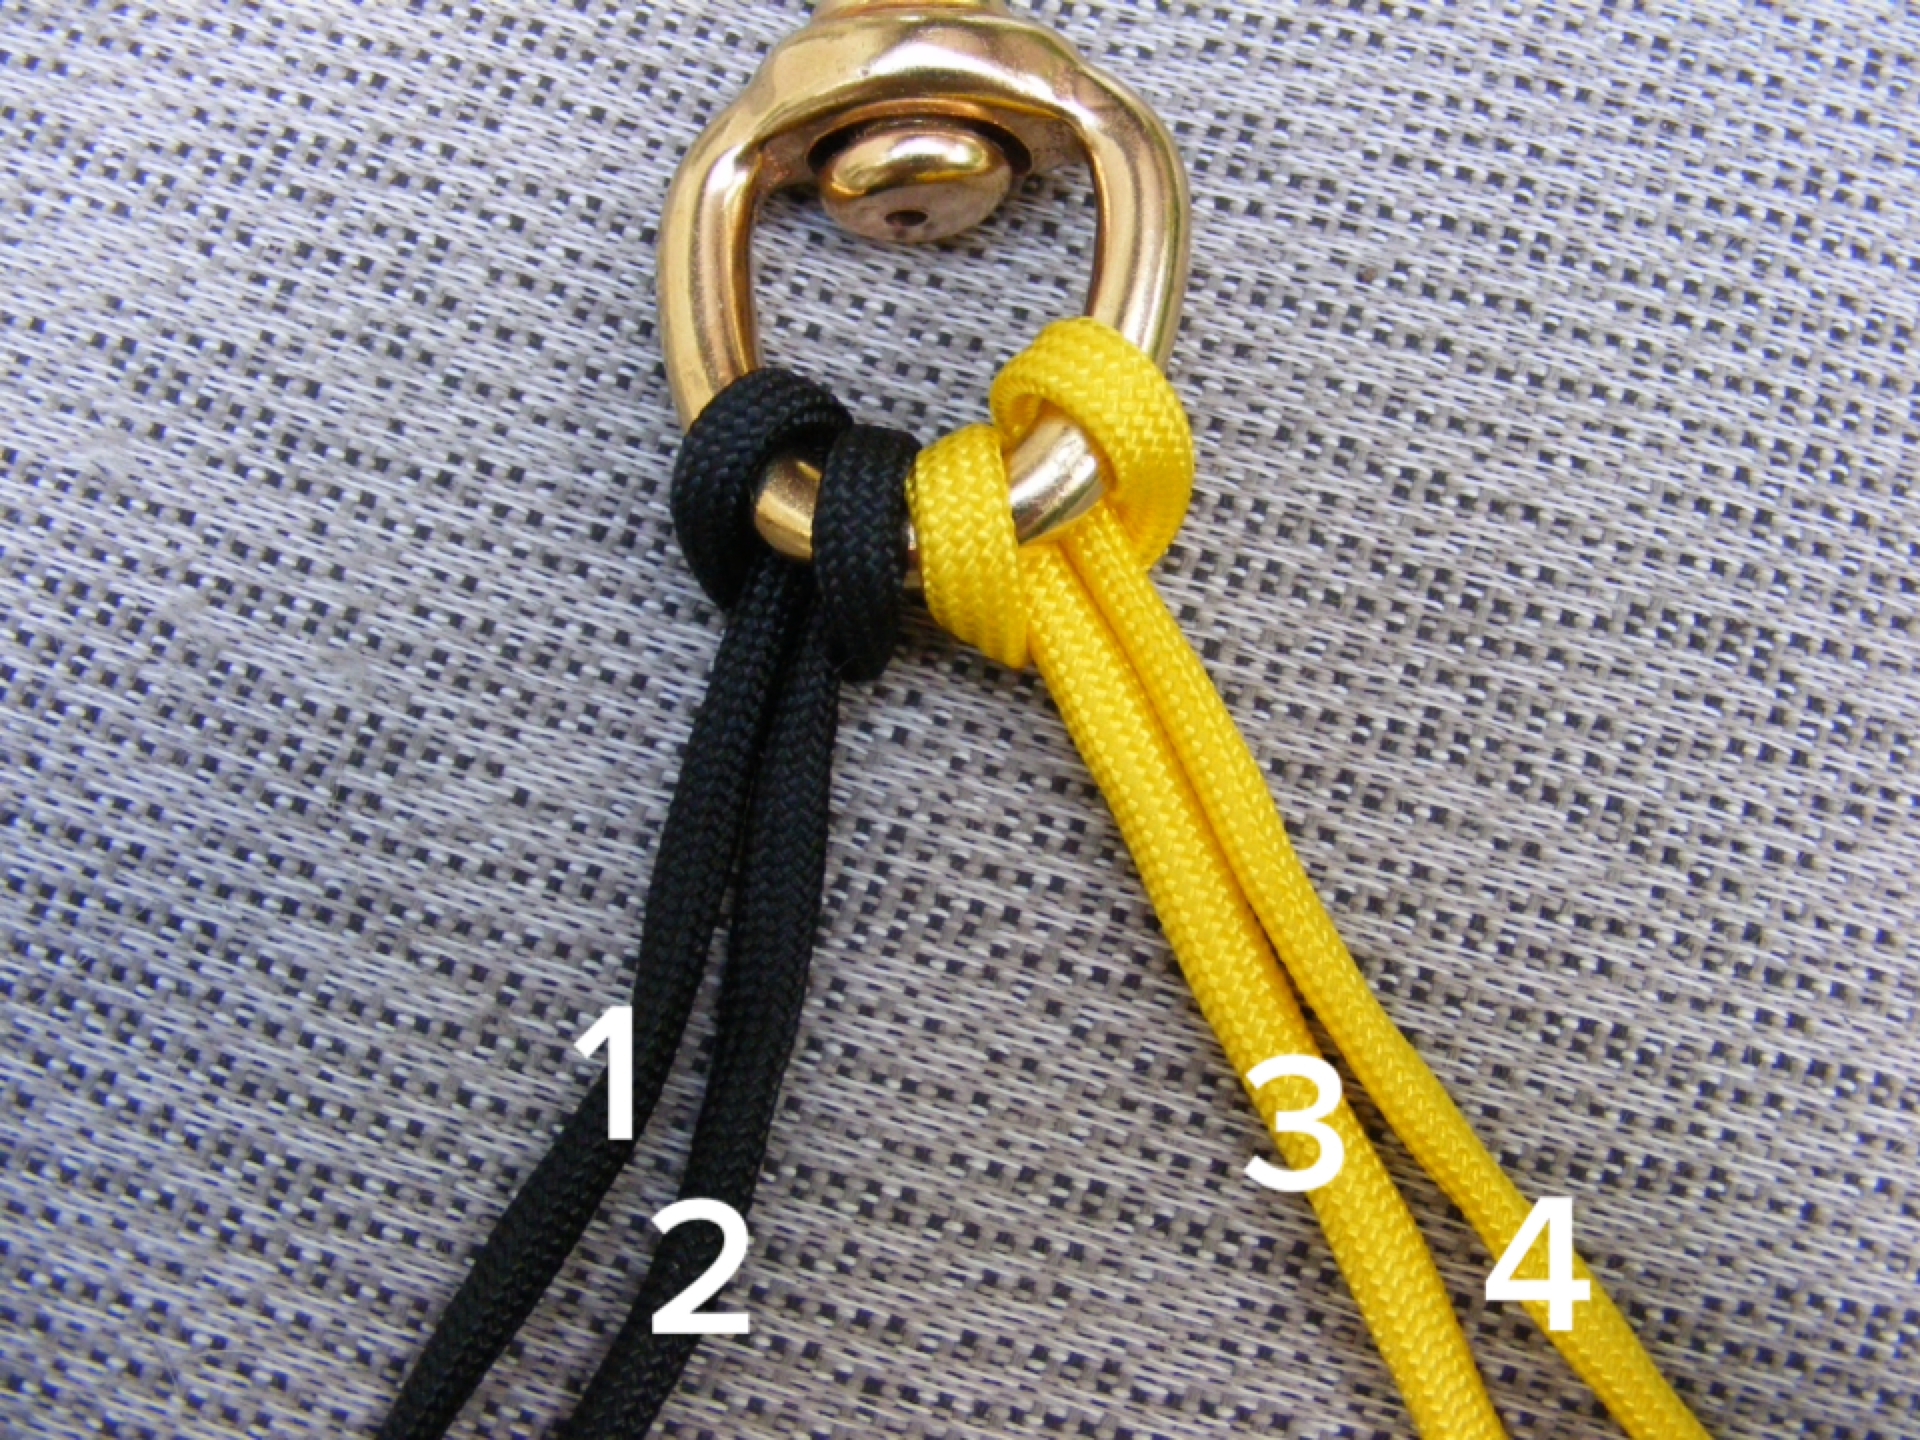 DIY Paracord Jig: An Essential Tool for Bracelet and Dog Collar Making